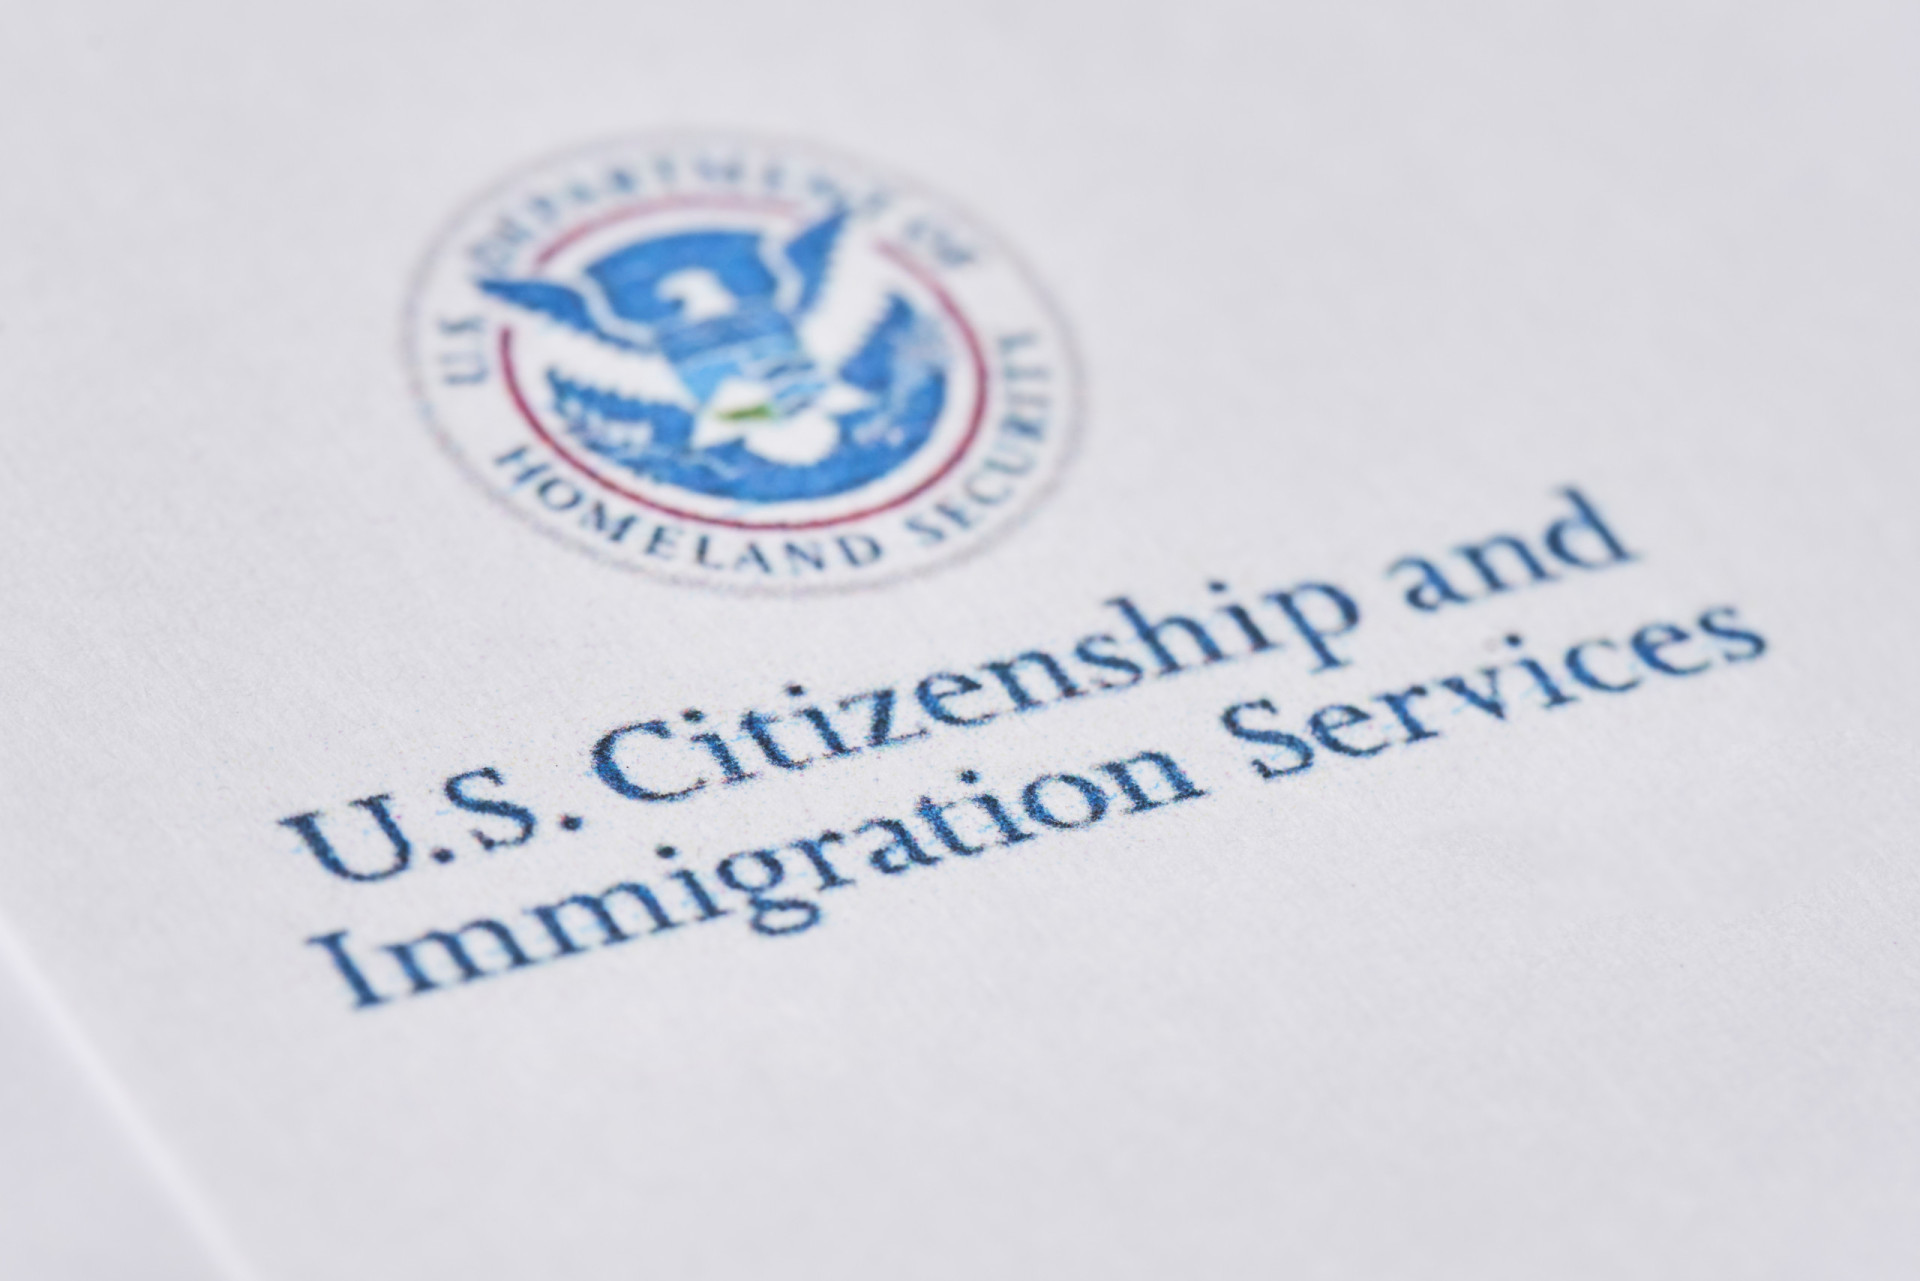 <p>After navigating the process and while your application is pending, remember to inform the USCIS of any change of address. You must do this within 10 days of moving to the new address.</p><p>You may also like:<a href="https://www.starsinsider.com/n/413822?utm_source=msn.com&utm_medium=display&utm_campaign=referral_description&utm_content=721230en-us"> Action stars: where are they now?</a></p>